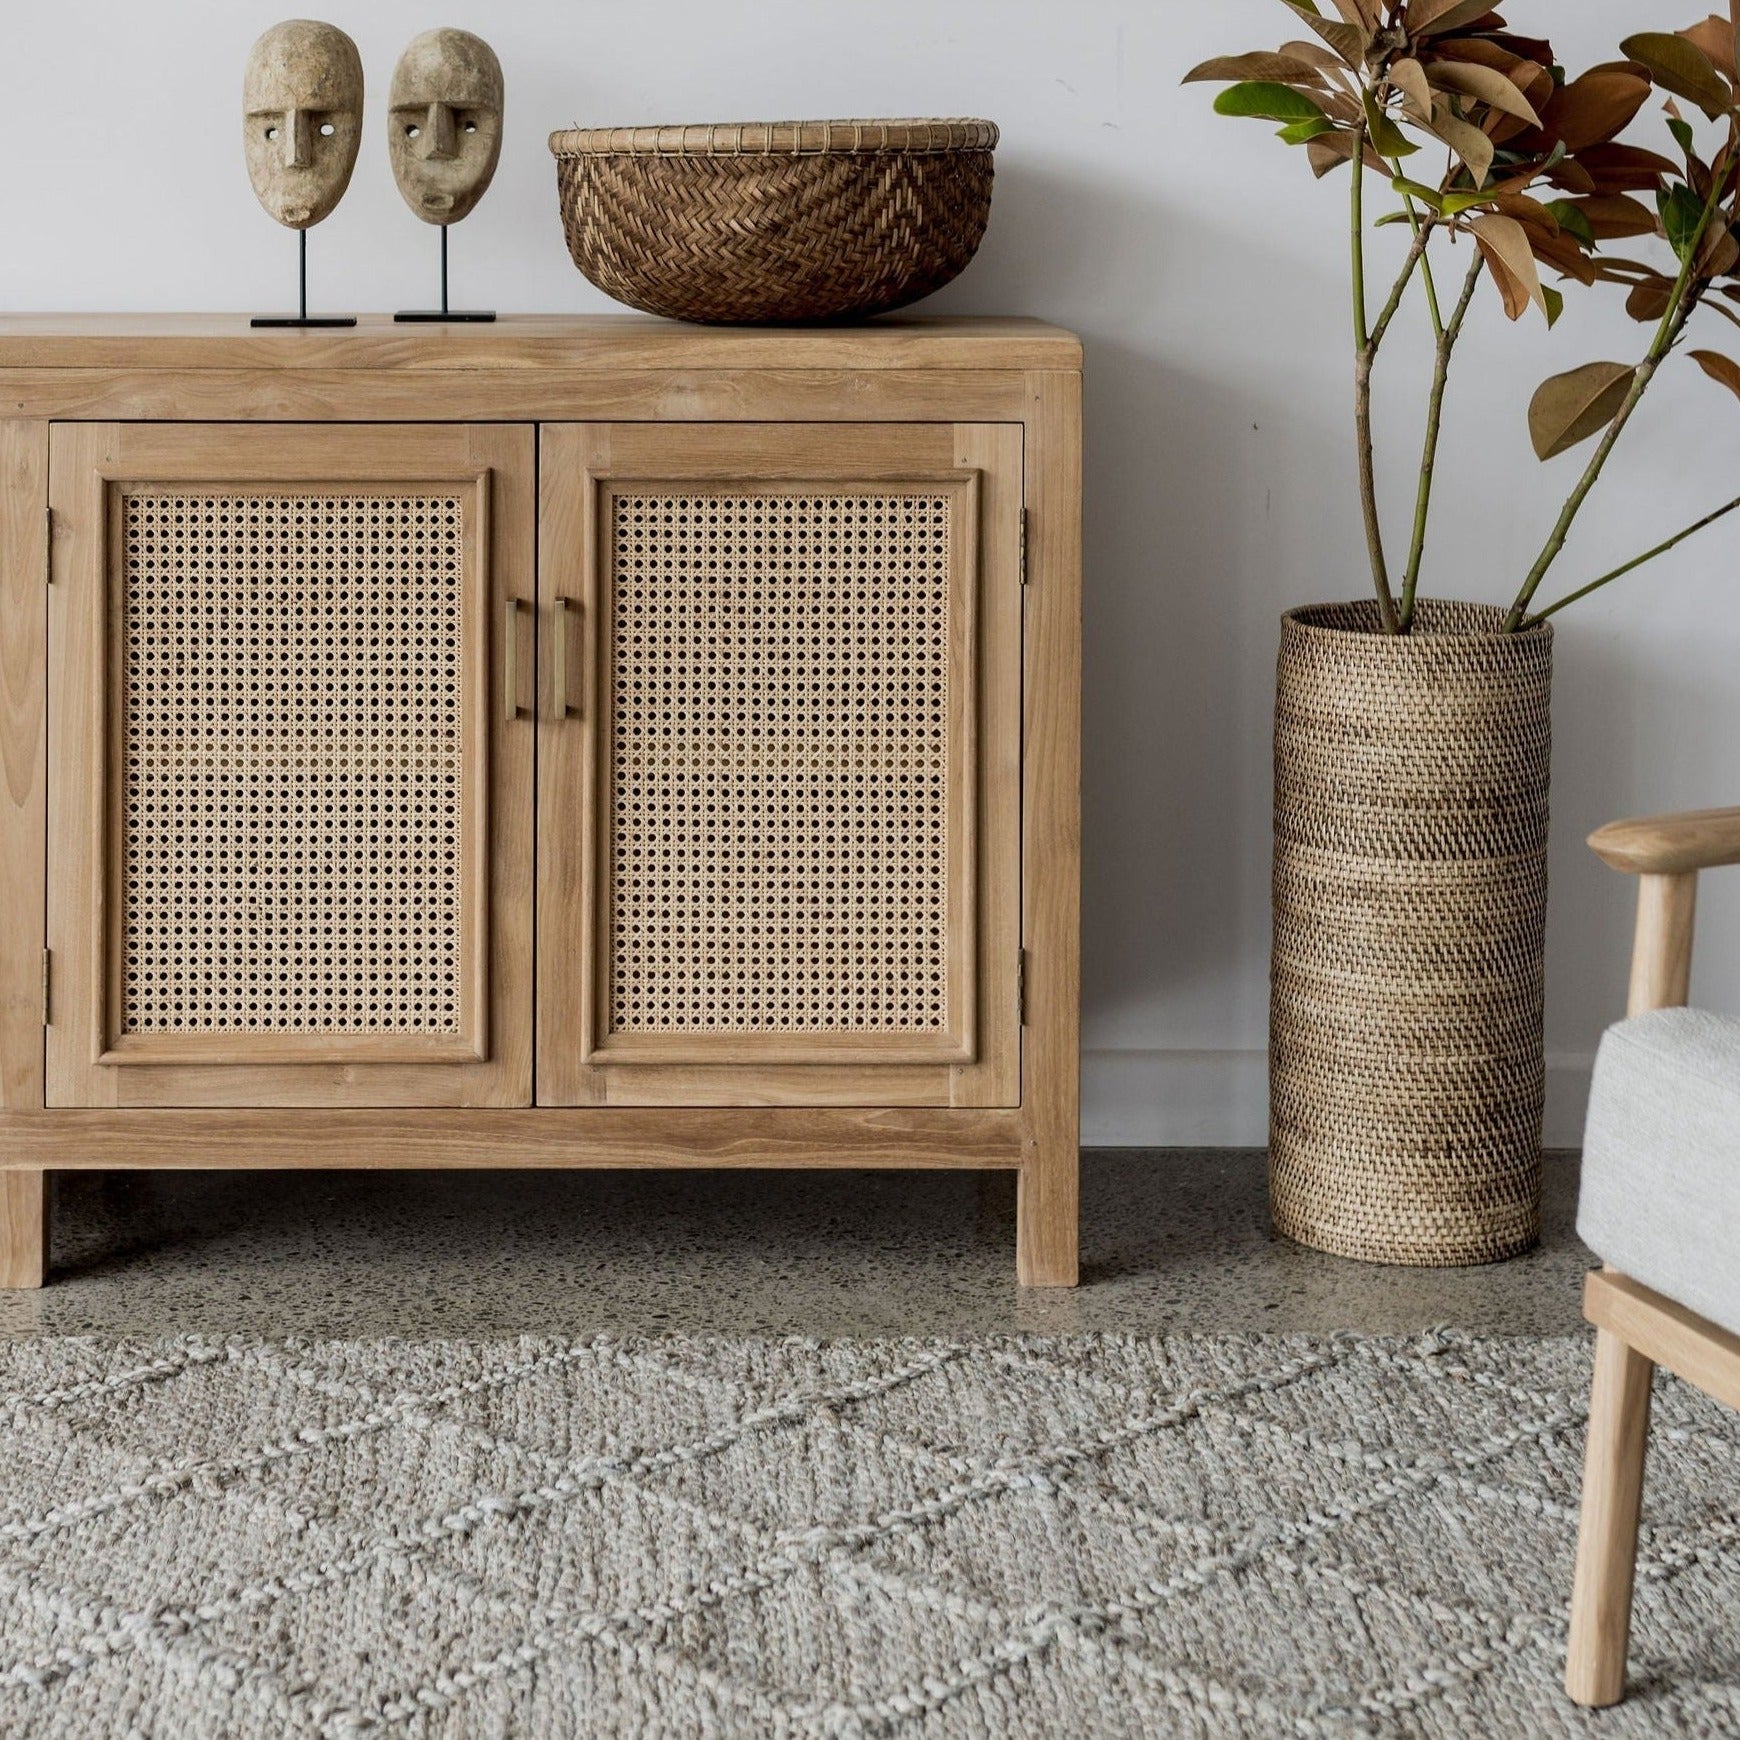 corcovado furniture cabinet and large floor rug new zealand